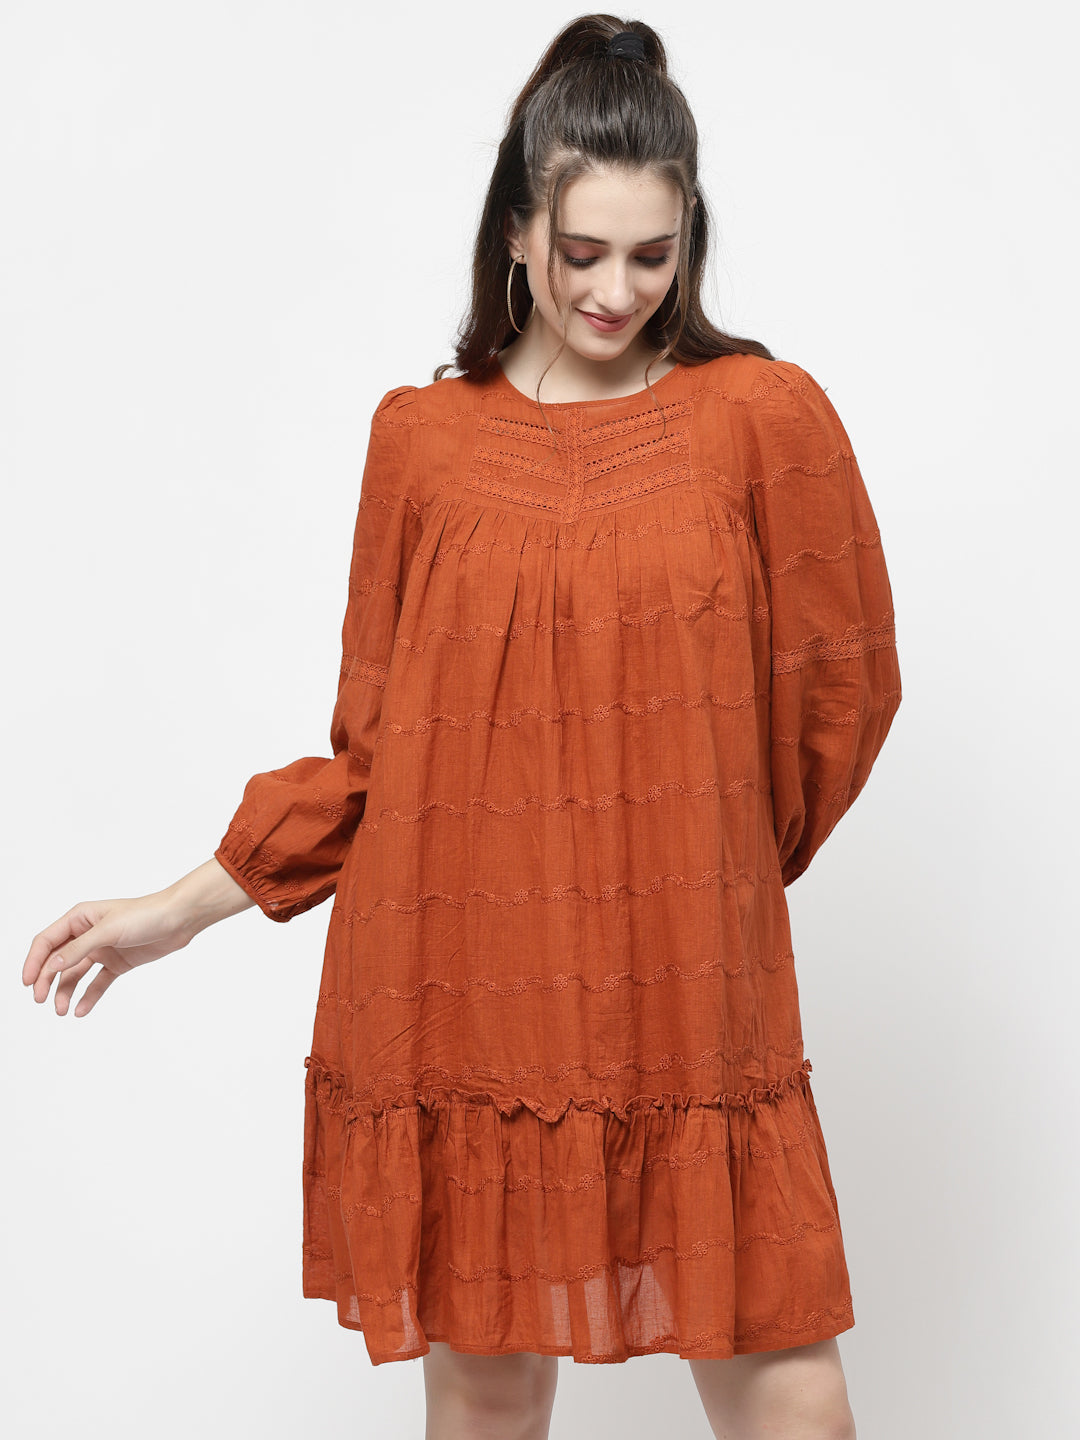 Terquois A-line Casual Dress Emblished with Lace Has Round Neck Dresses Terquois Klothing   